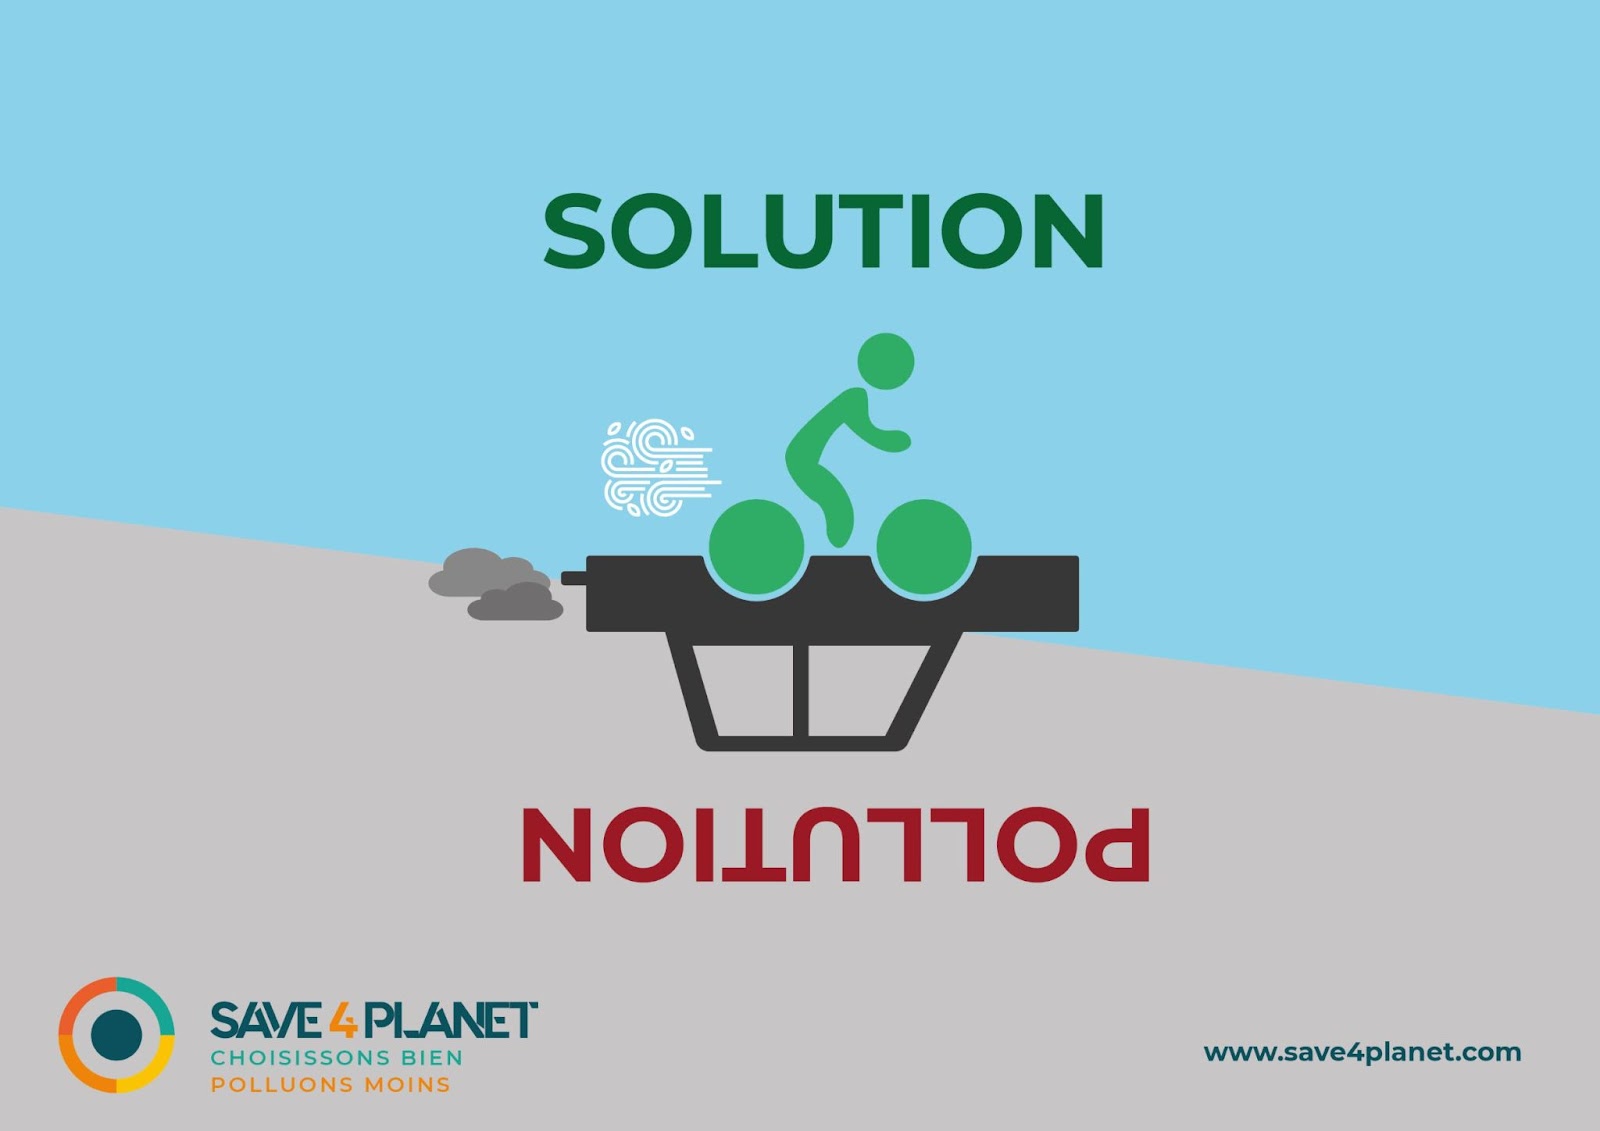 Solution pollution velo image